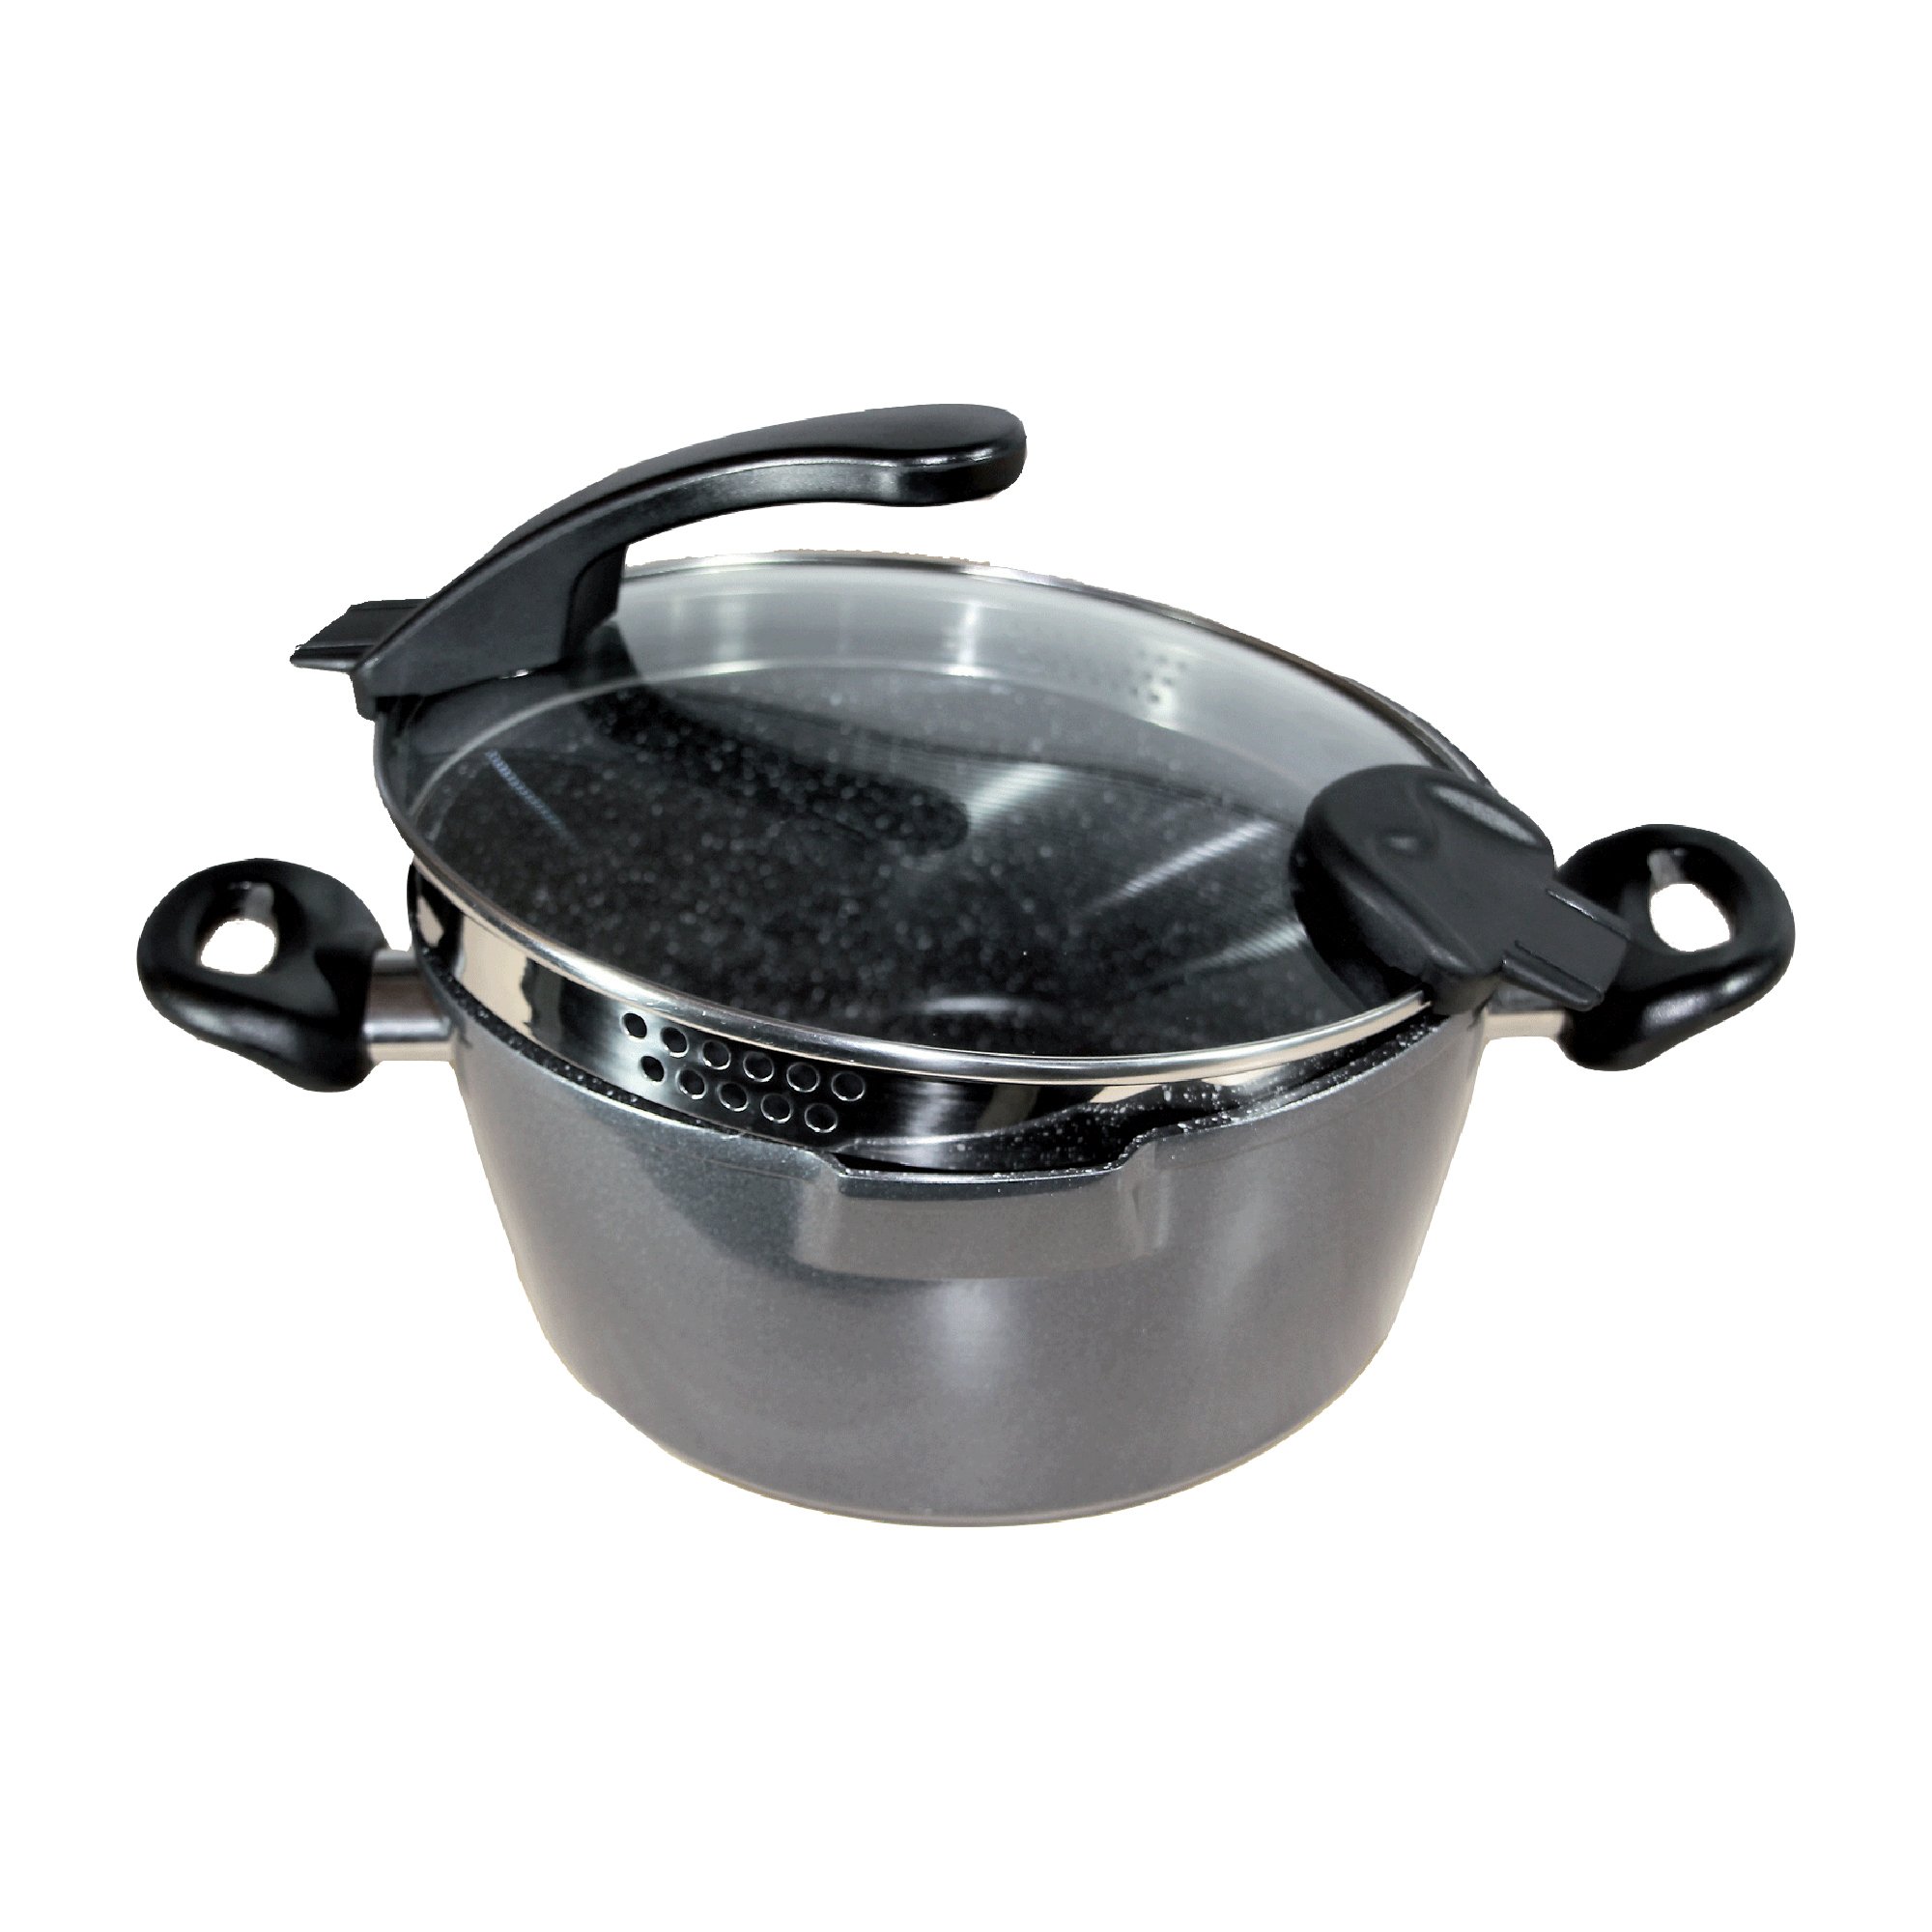 STONELINE® FUTURE frying pan 28 cm, with sieve glass lid, non-stick coating, induction and oven-safe